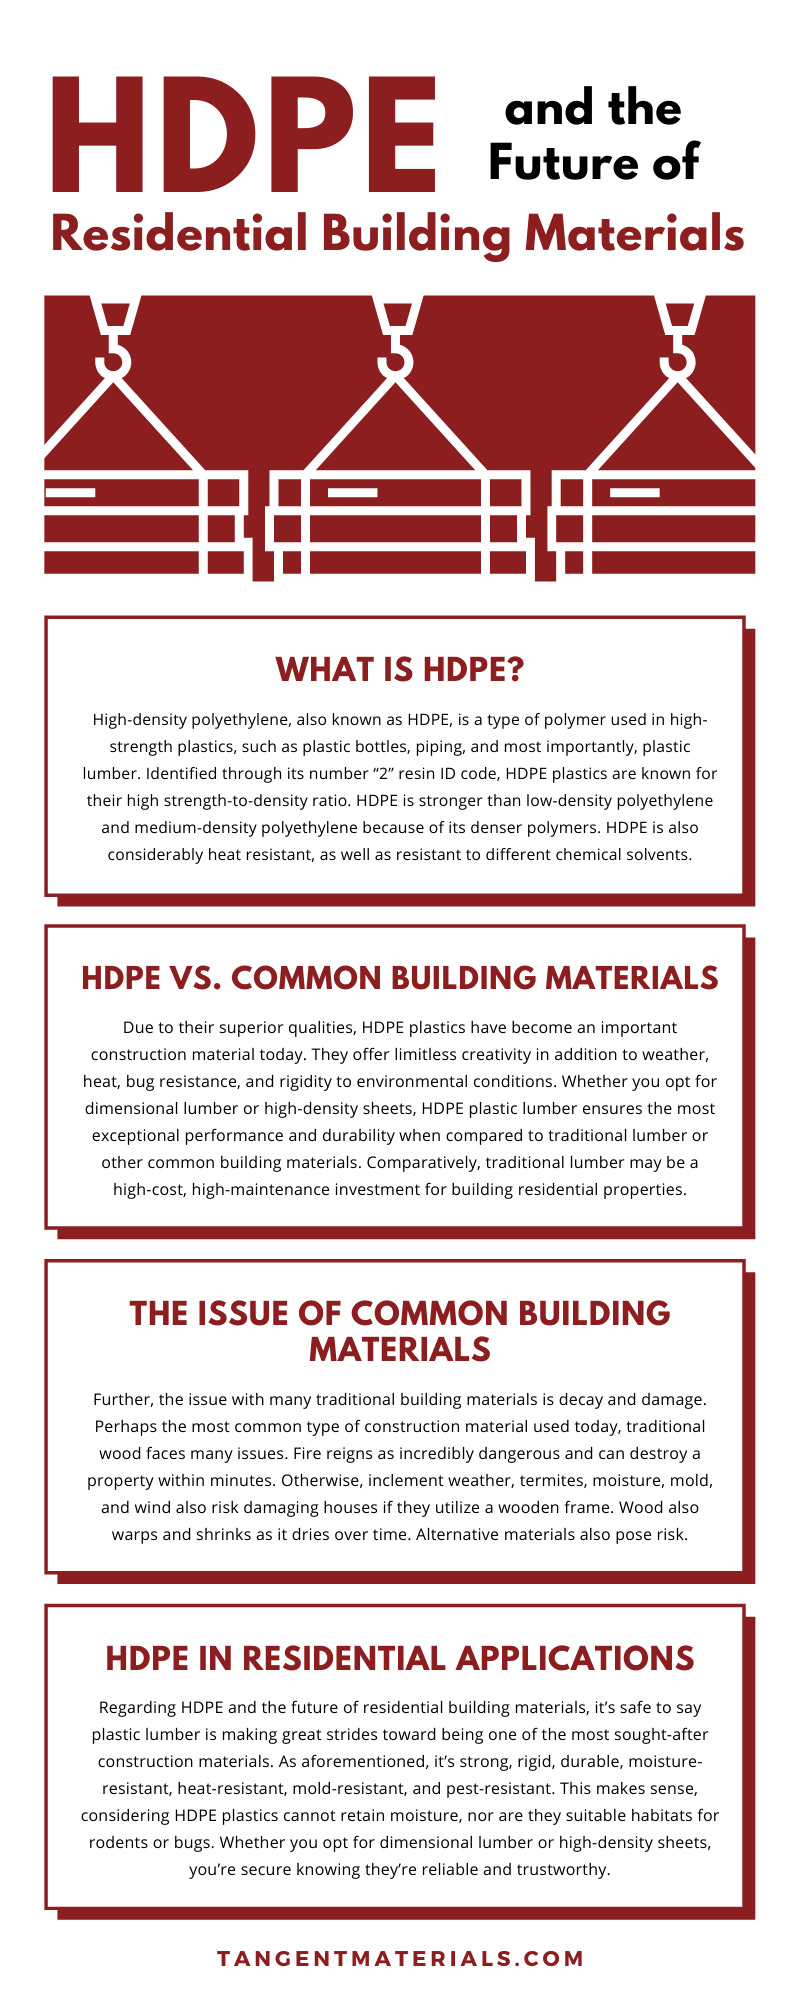 HDPE and the Future of Residential Building Materials